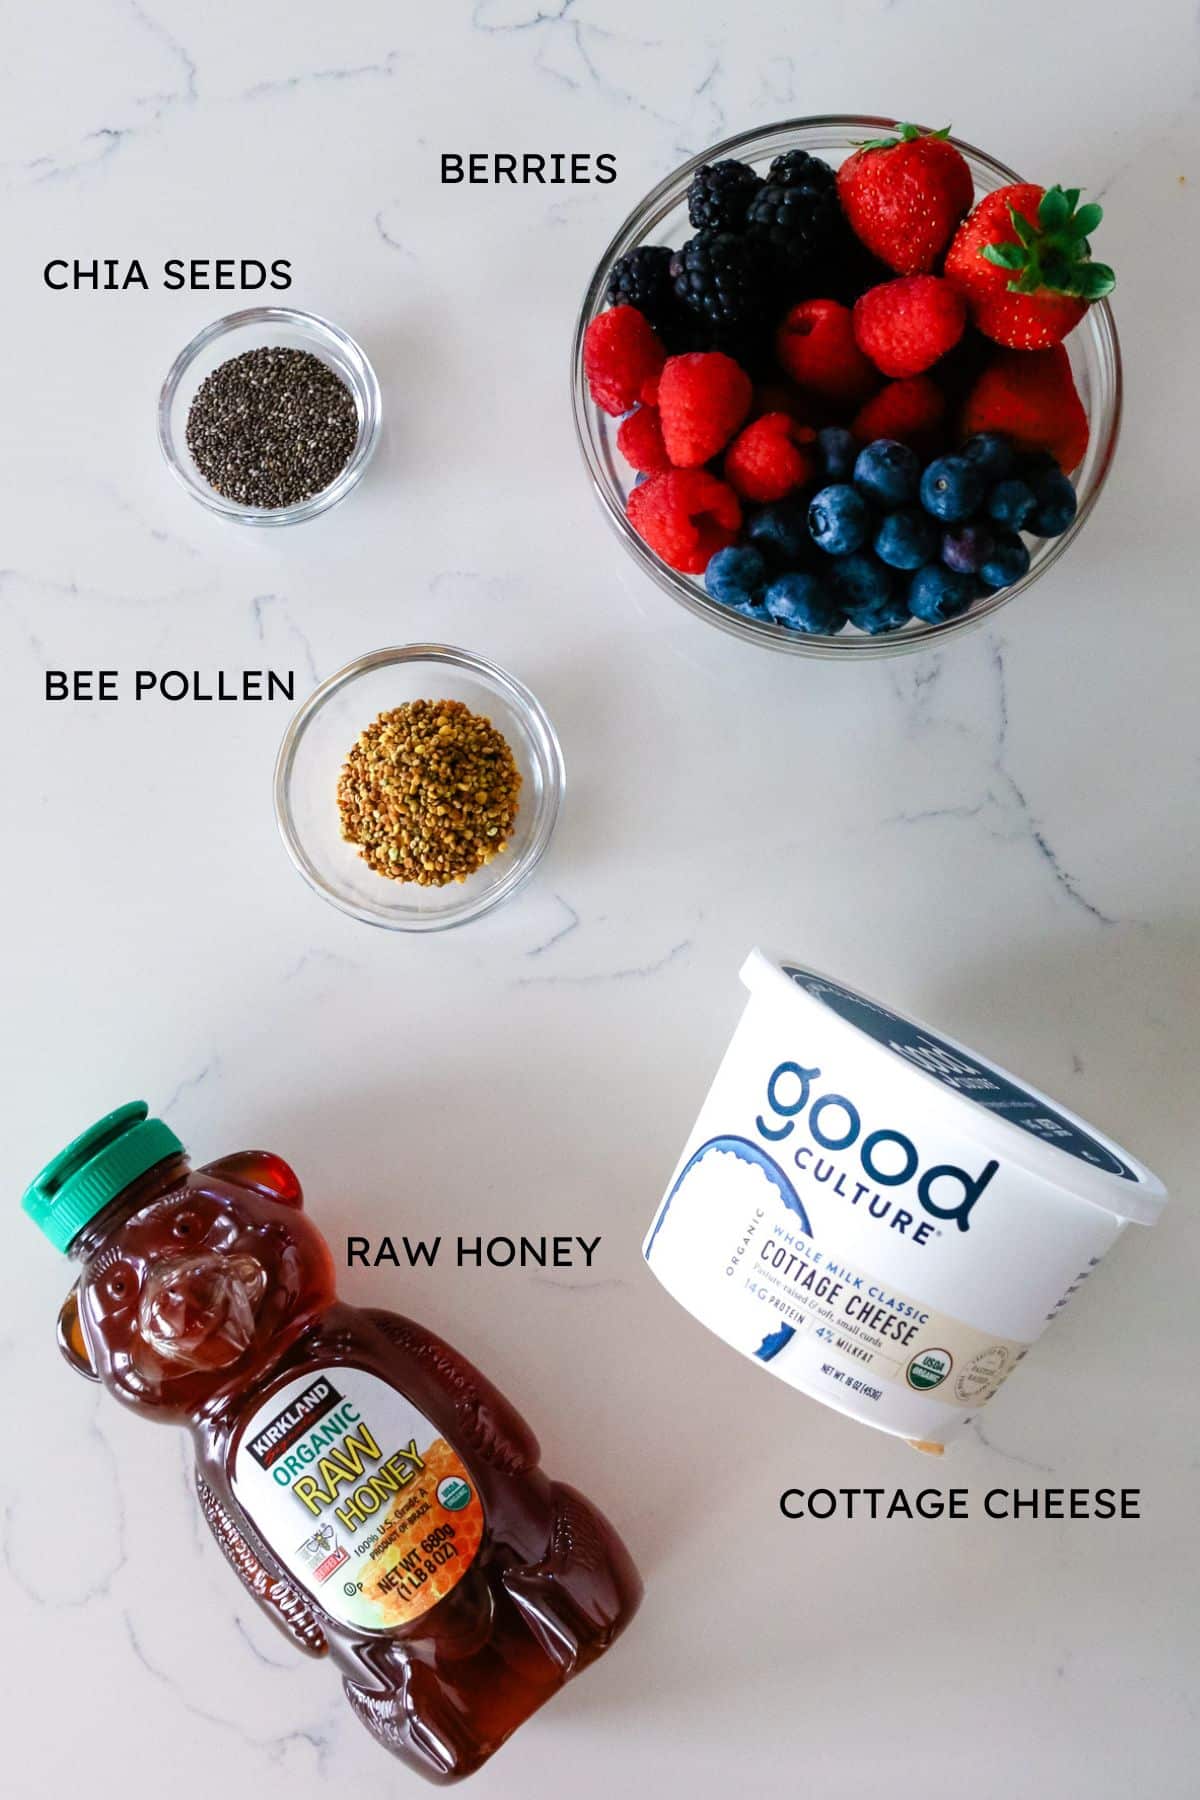 ingredients for cottage cheese bowls include bowl of fresh mixed berries, chia seeds, bee pollen, honey, and one tub of good culture cottage cheese.